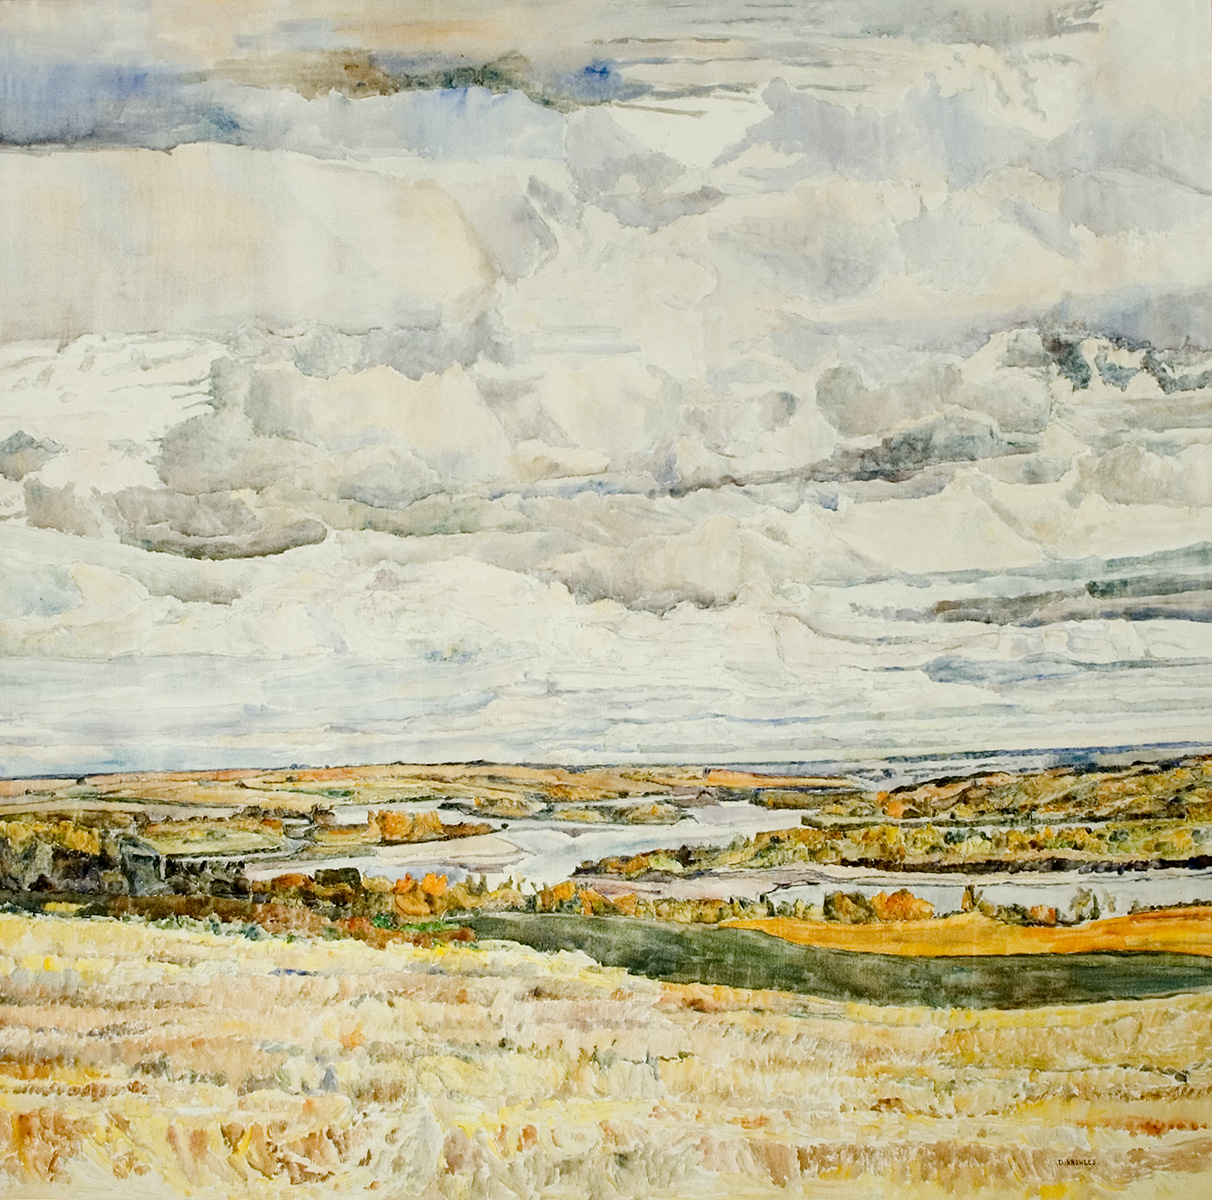 Painting of a prairie landscape. A flat horizon separates big clouds in the sky from yellow and green fields below.